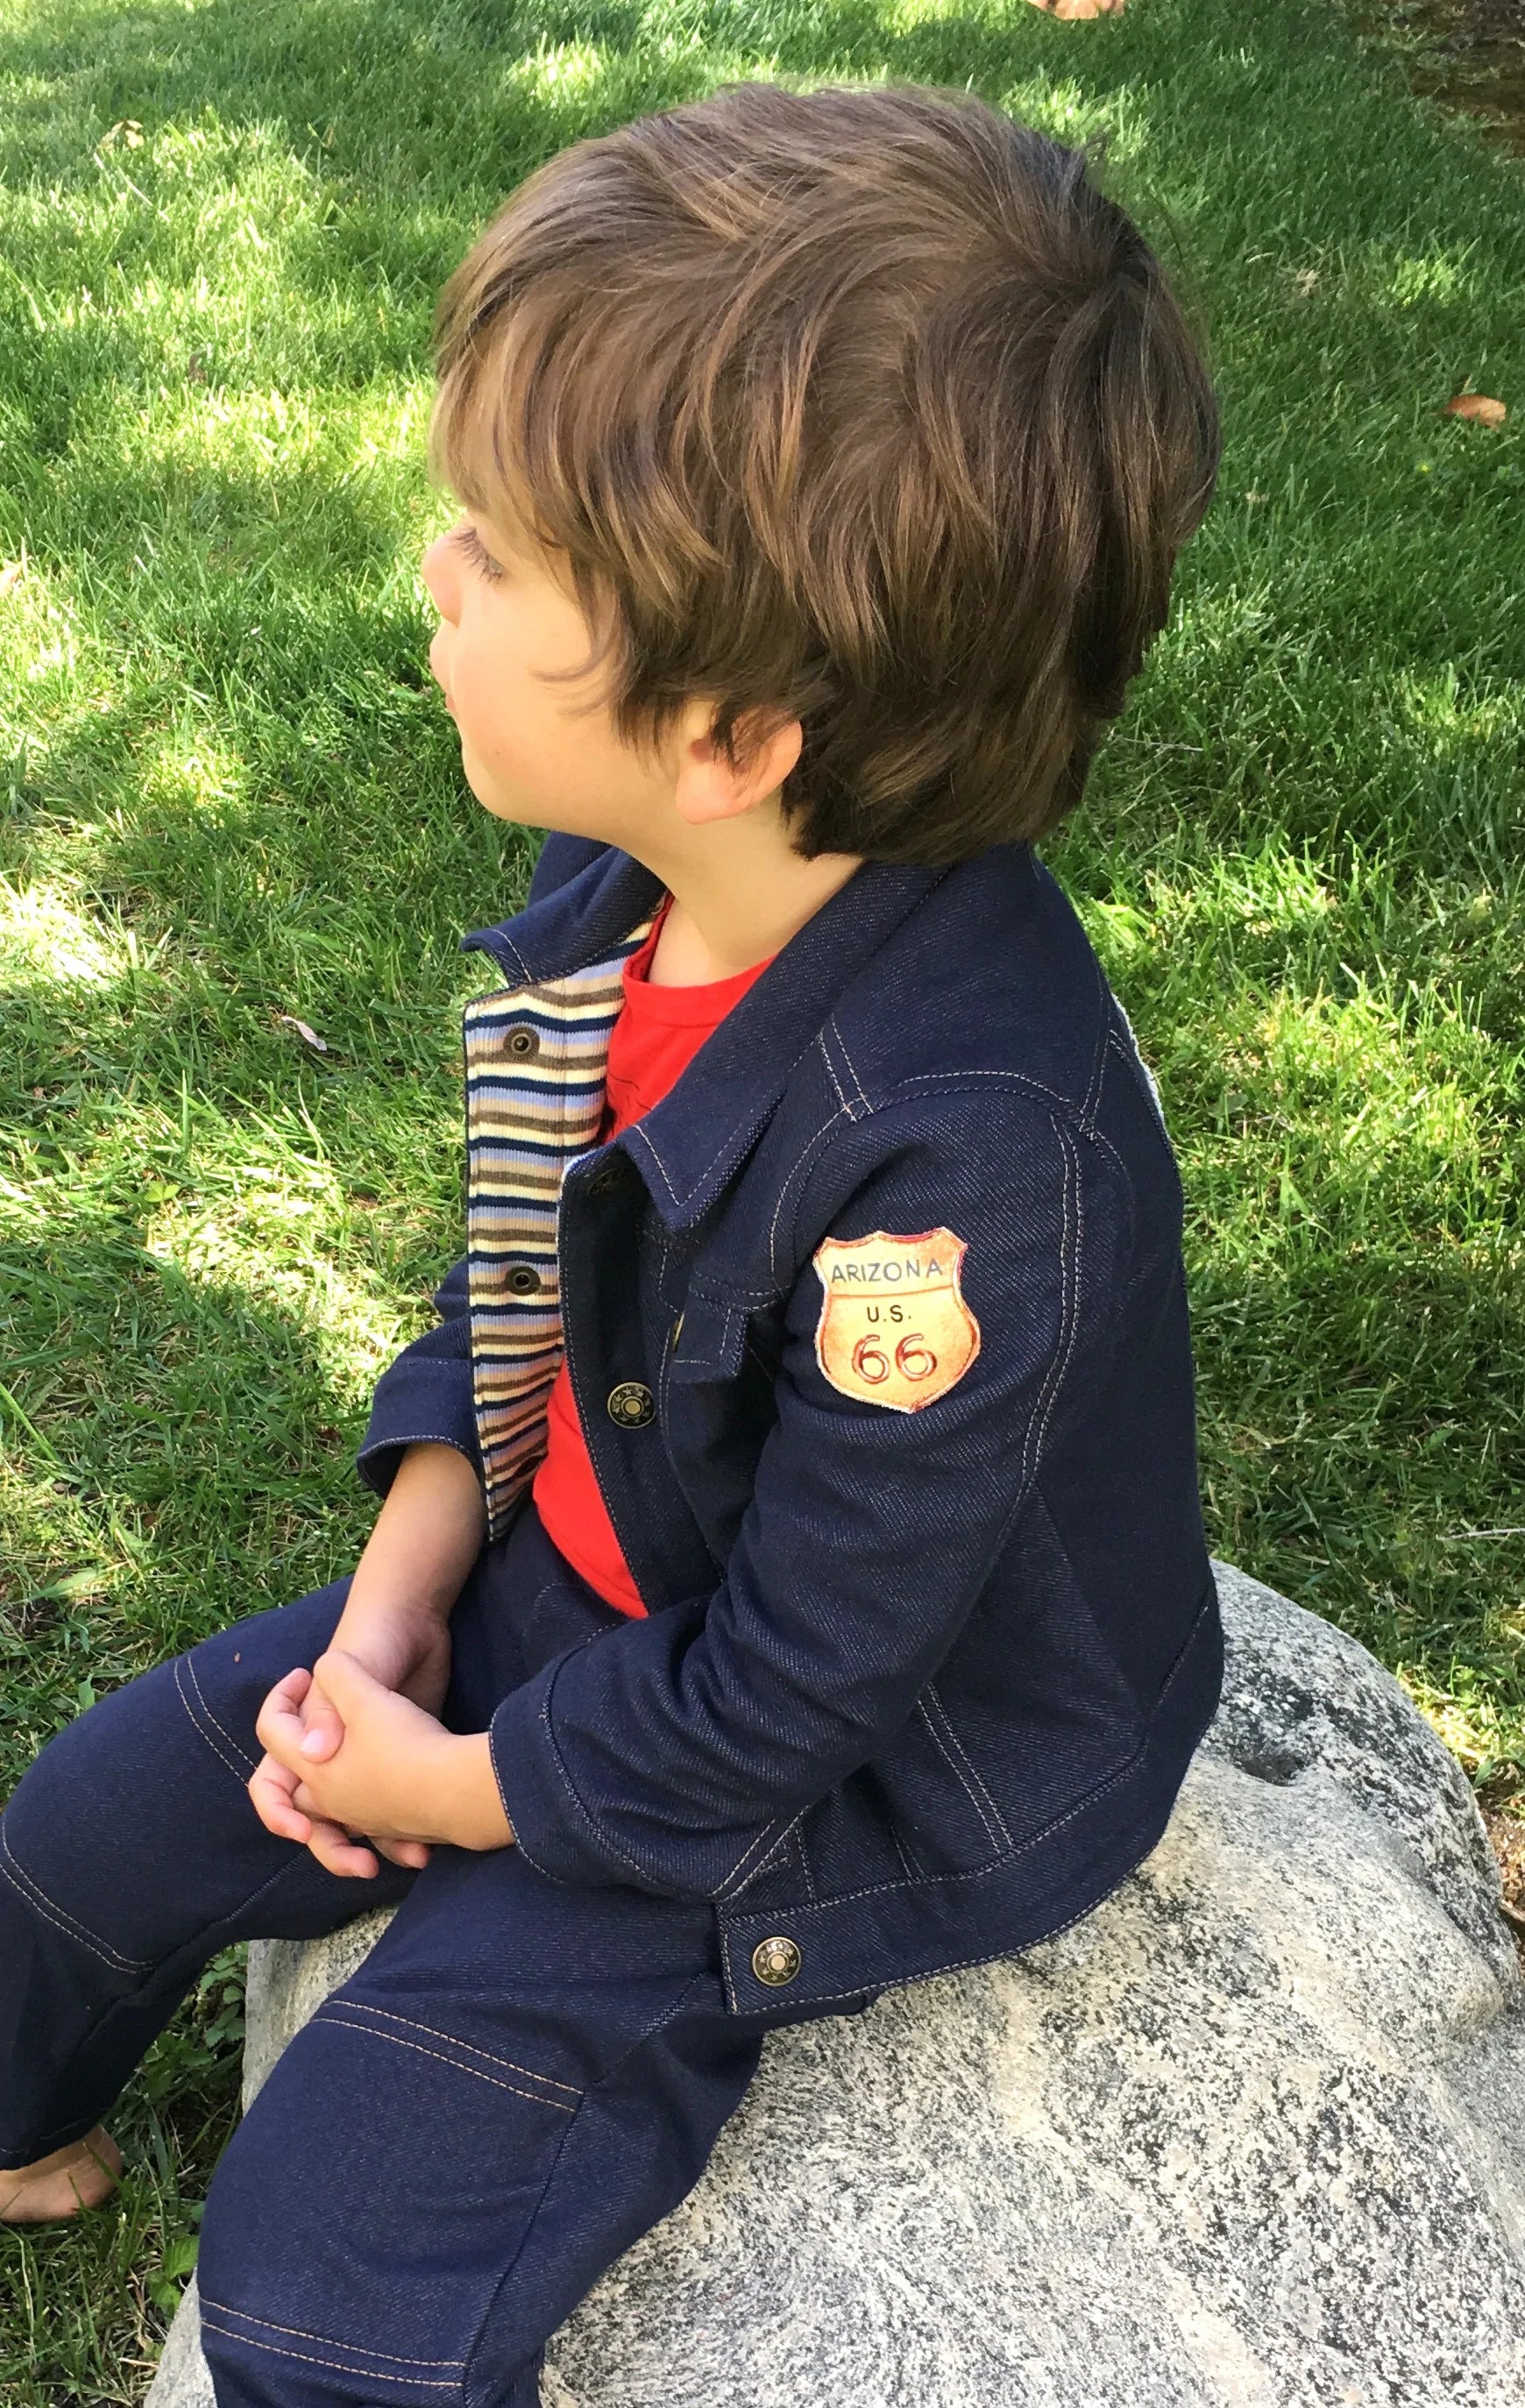 Route 66, boys, soft, comfy, denim jacket,stripe,cotton lining,baby,toddler,cute kids clothes,best,,vintage jean jacket,made in USA